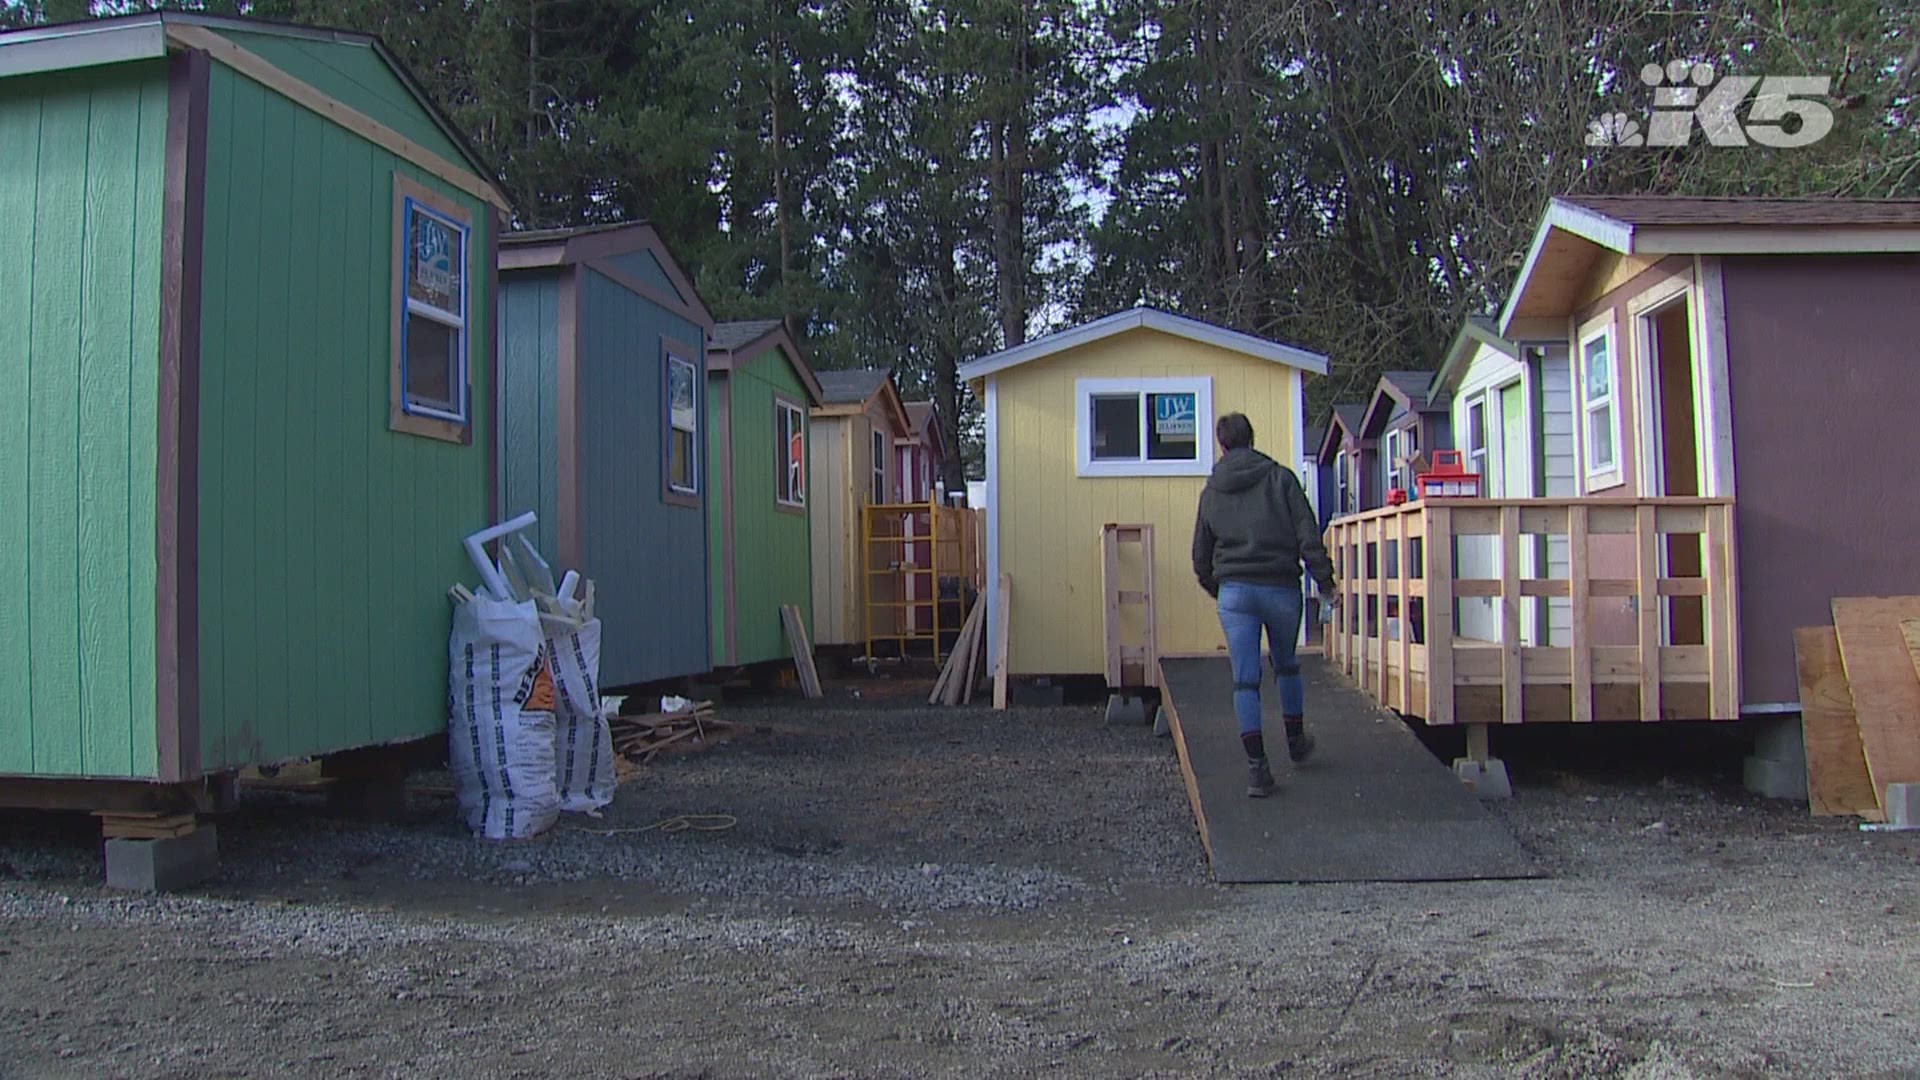 There’s about to be a new place for the homeless to live in Olympia. The homeless population in the city has grown tenfold since last summer.